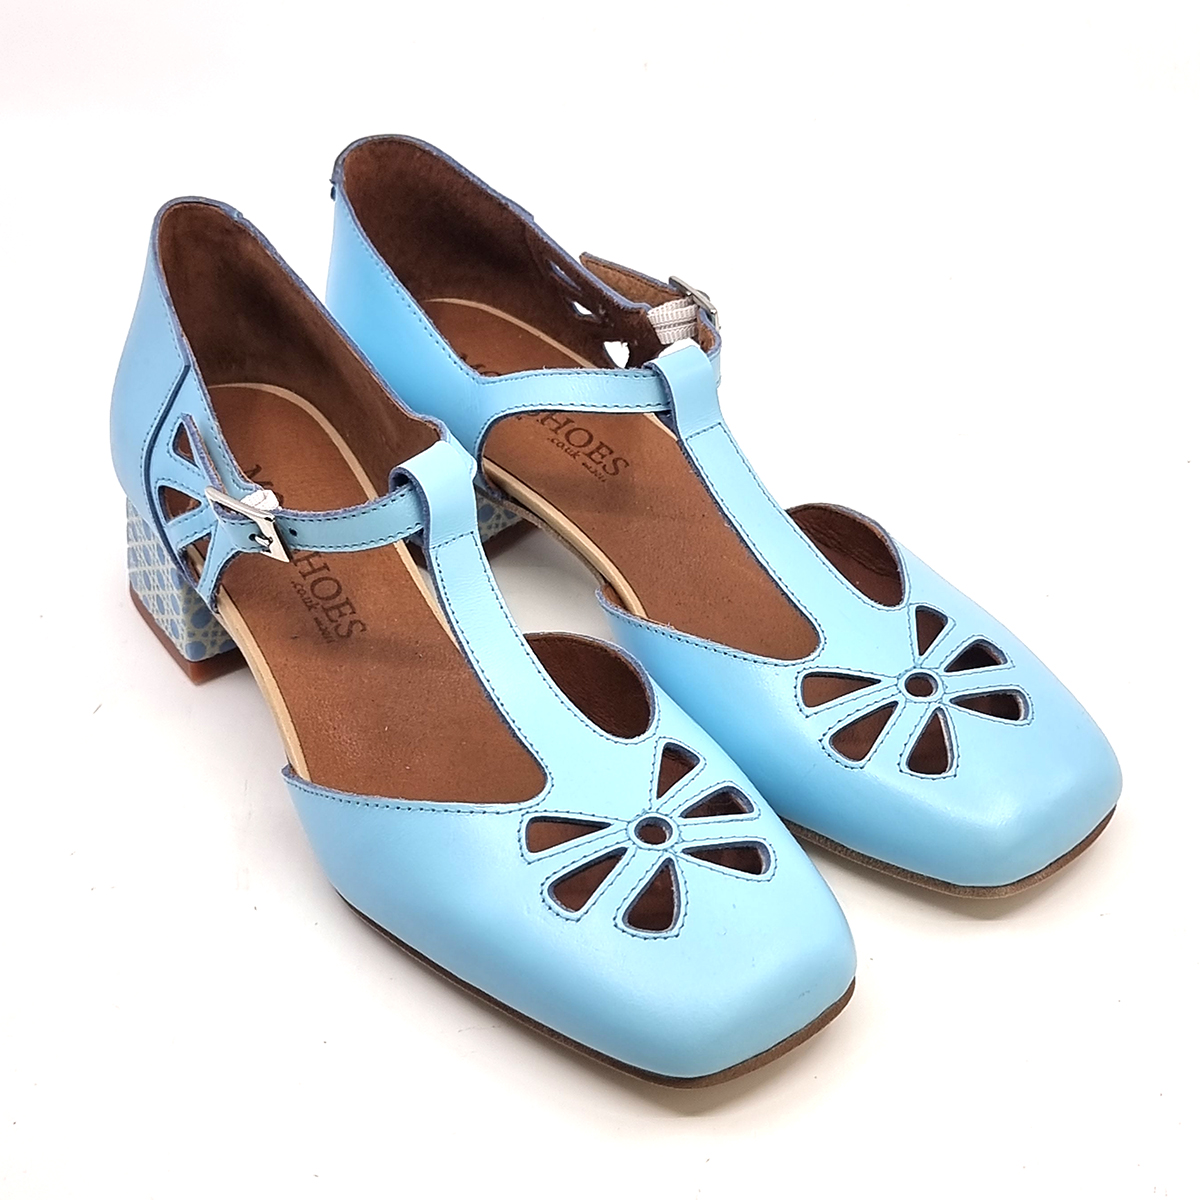 The Zinnia in Sky Blue – Ladies Retro Style Shoe by Mod Shoes – Mod Shoes